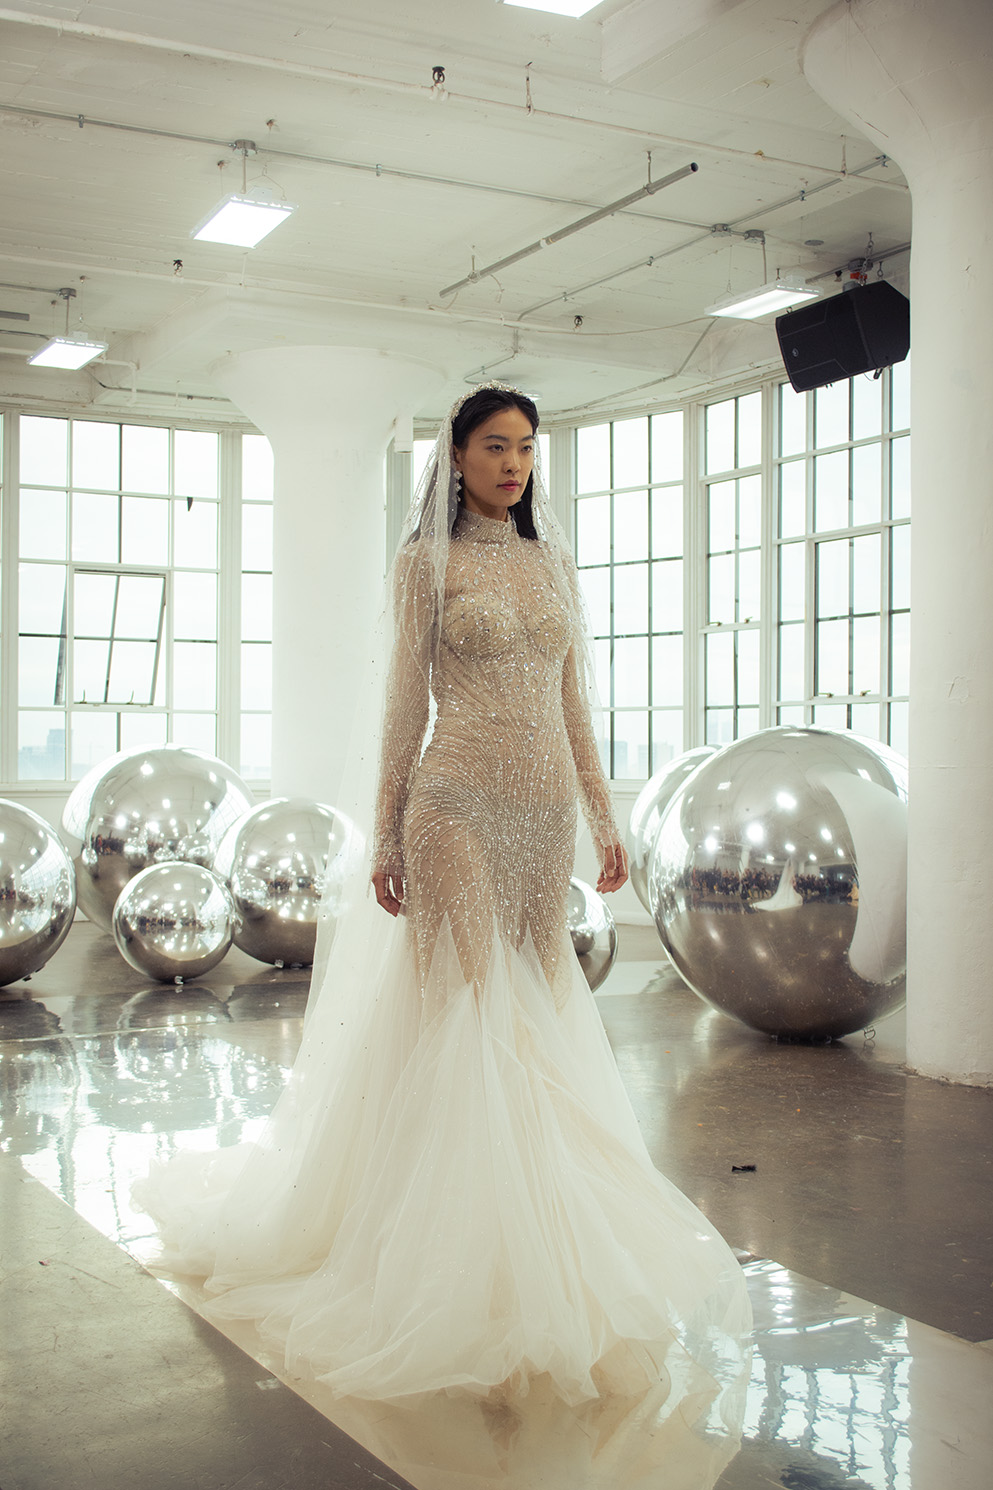 A woman wears a white beaded dress with a matching veil. A window with metallic spheres on the ground is in the background.